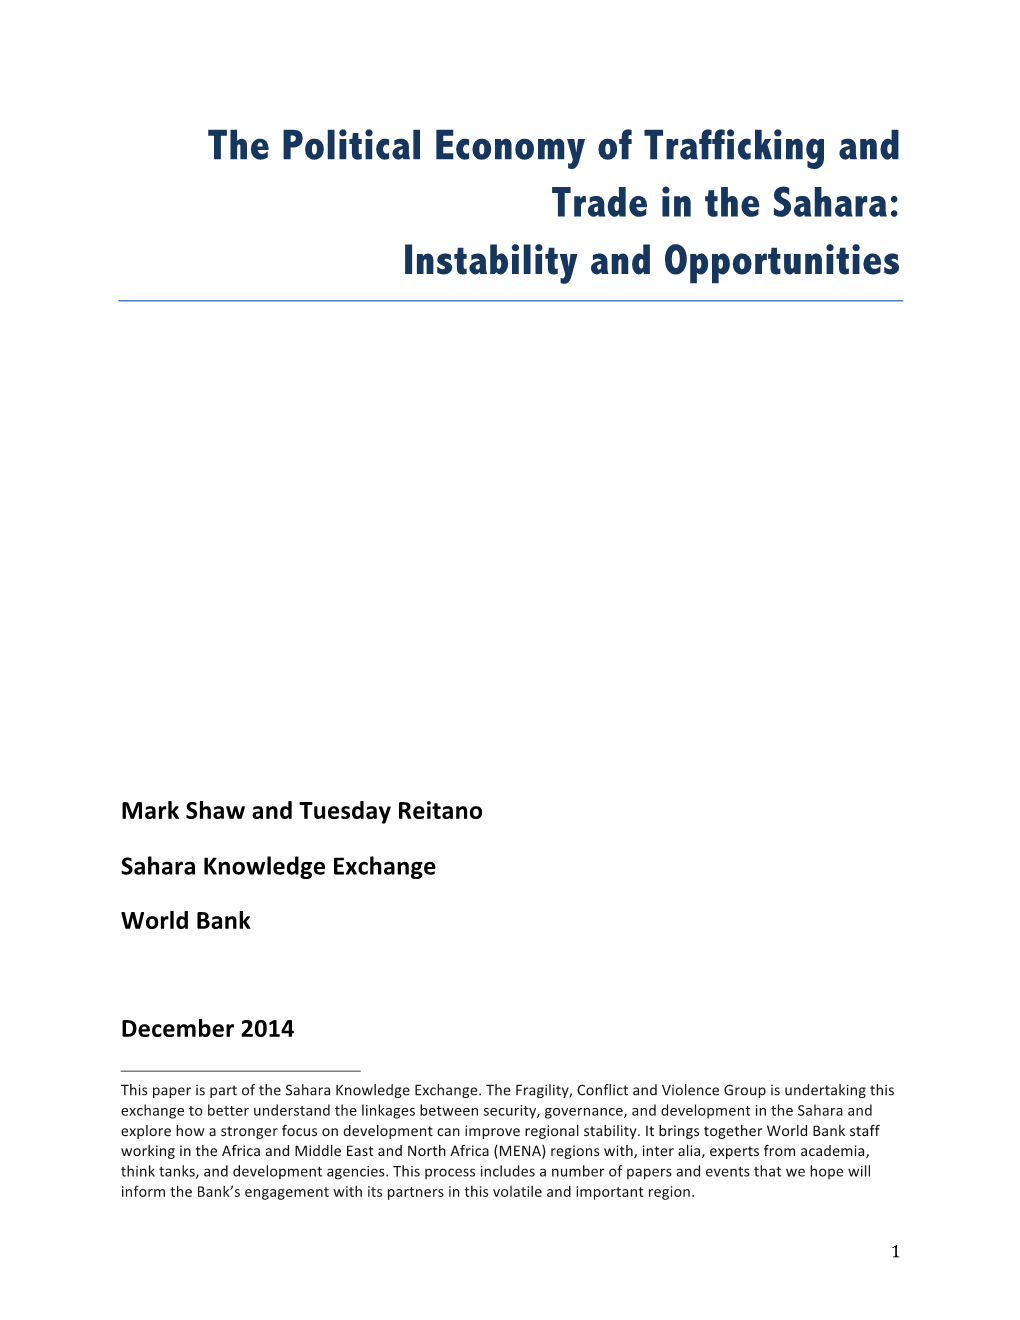 The Political Economy of Trafficking and Trade in the Sahara: Instability and Opportunities